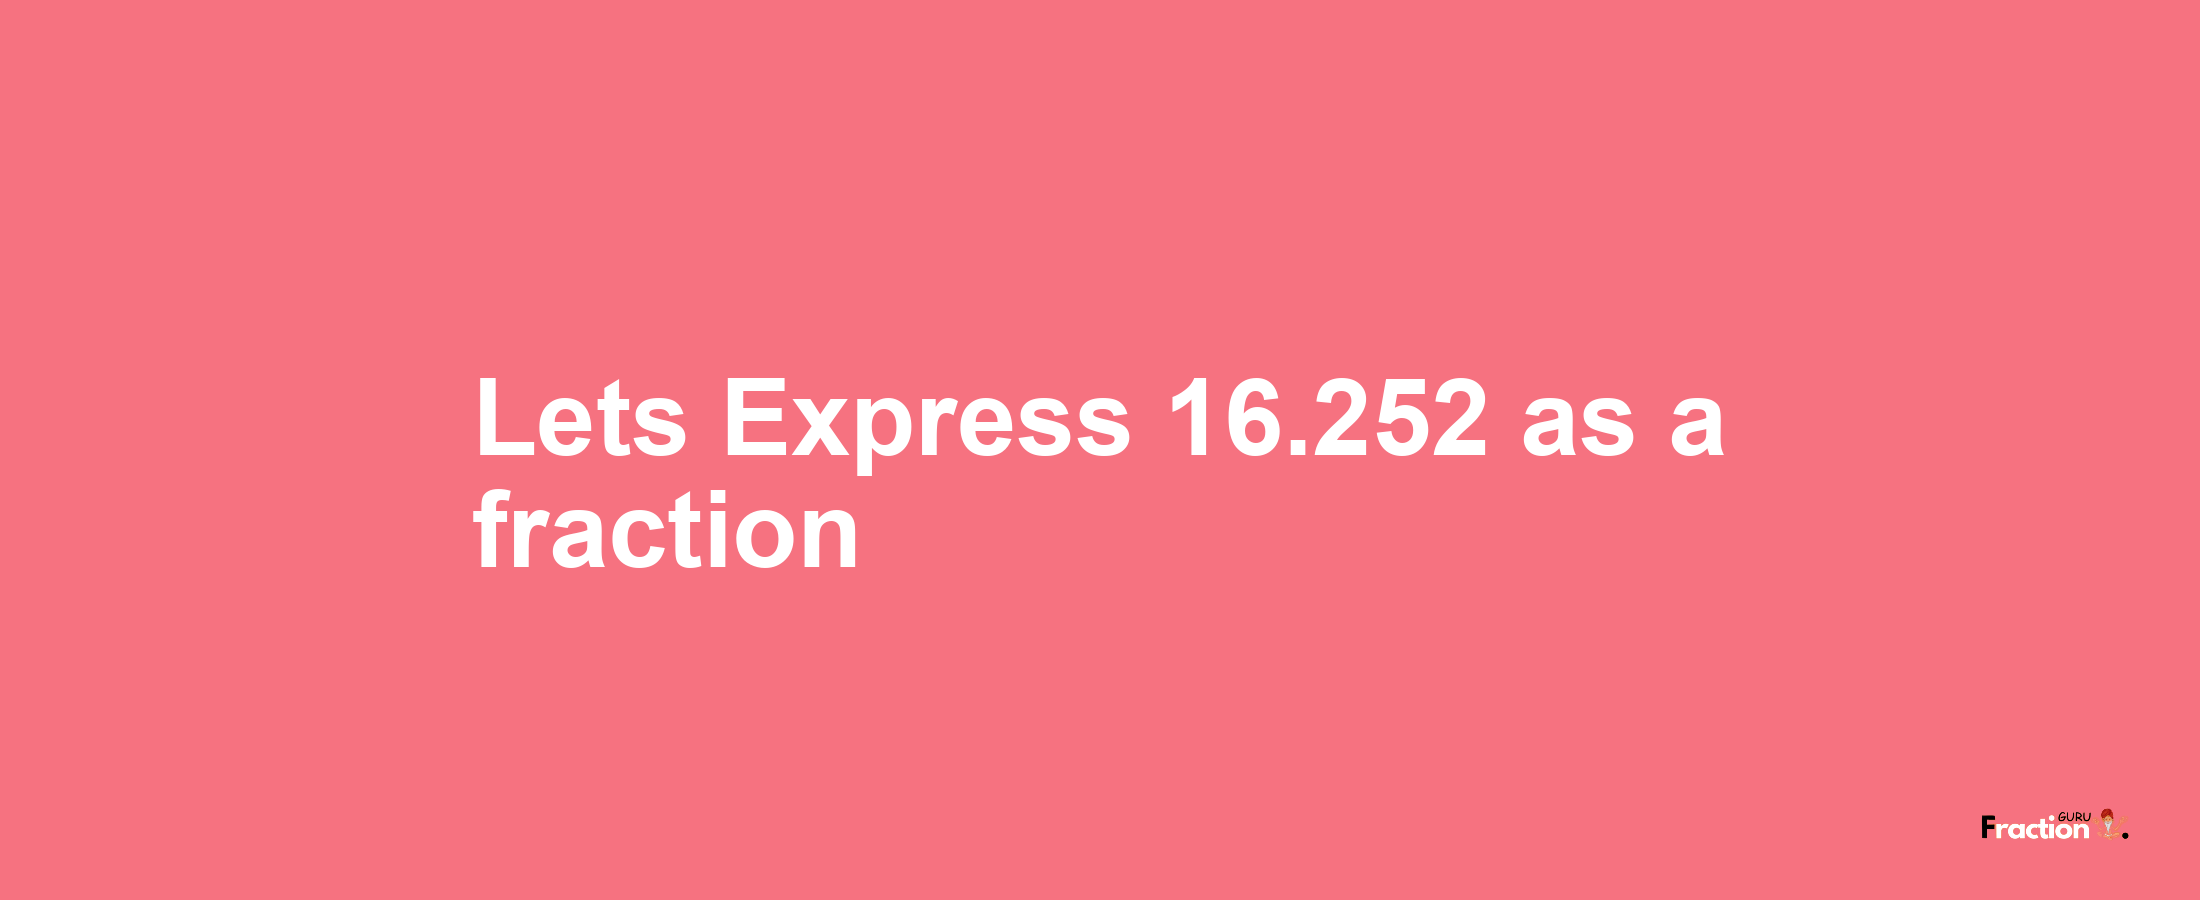 Lets Express 16.252 as afraction